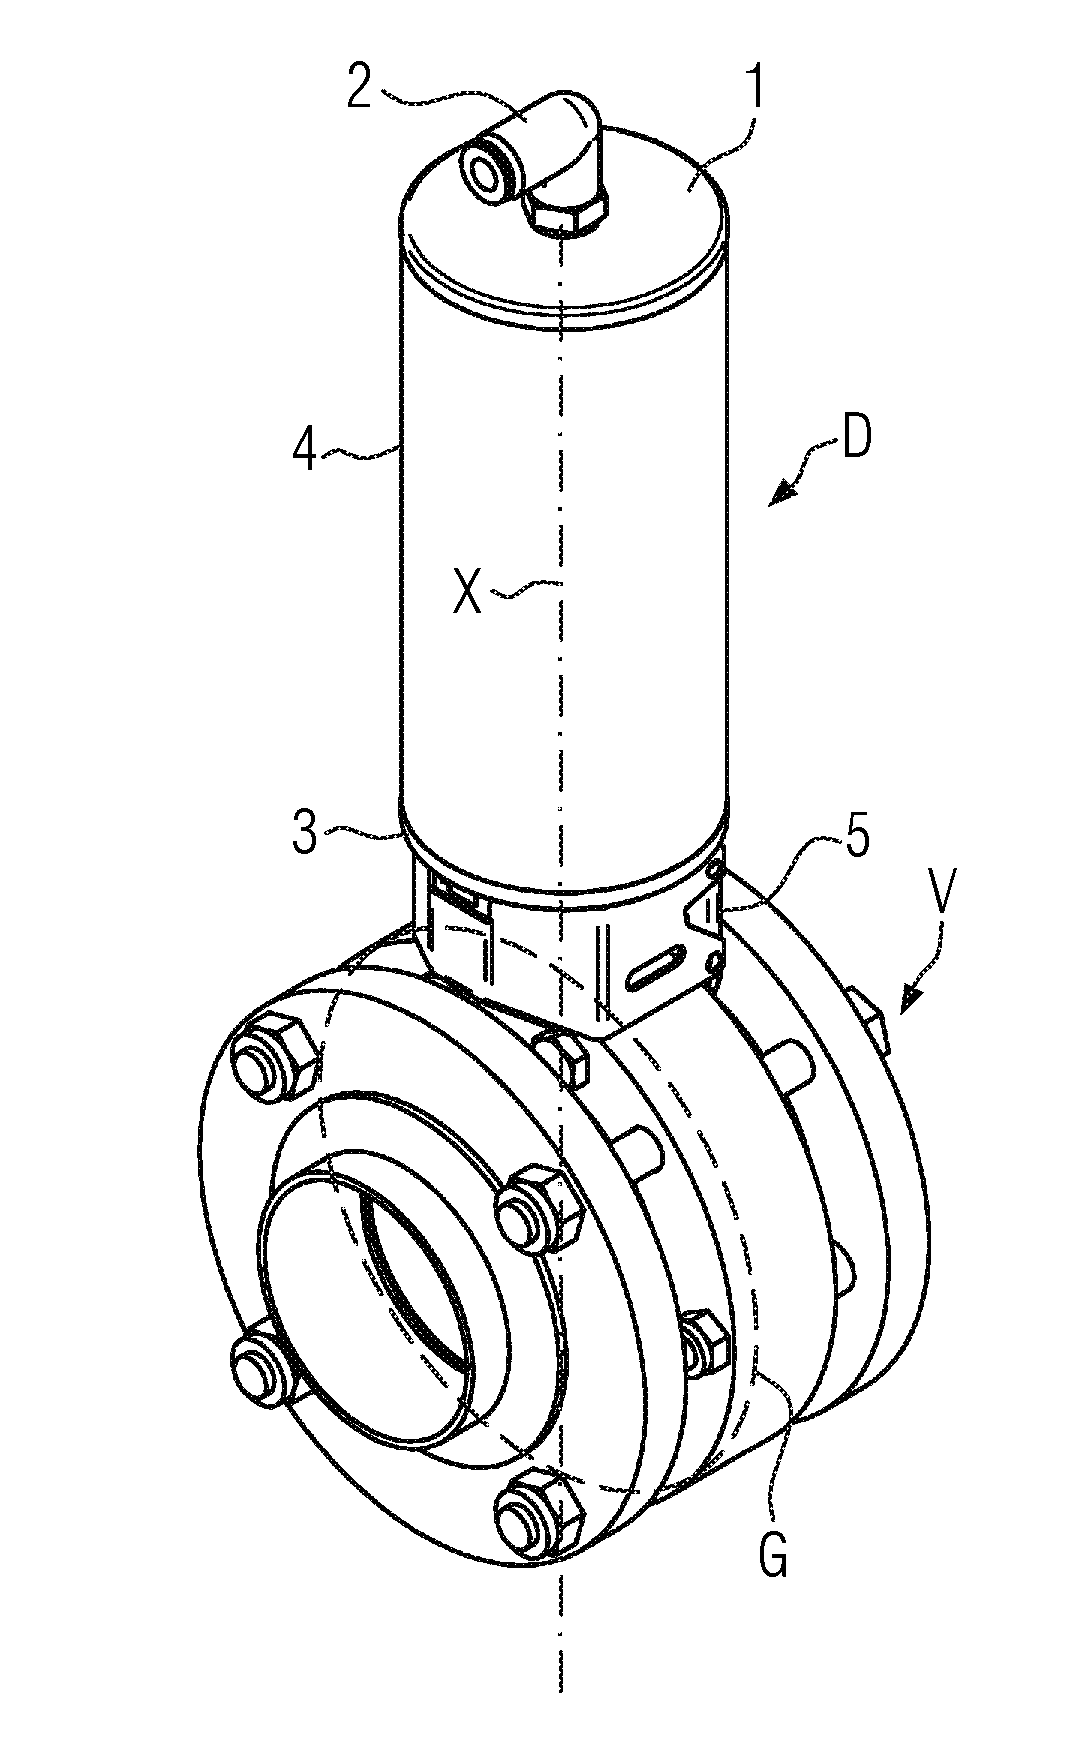 Rotary actuator, and beverage filling system